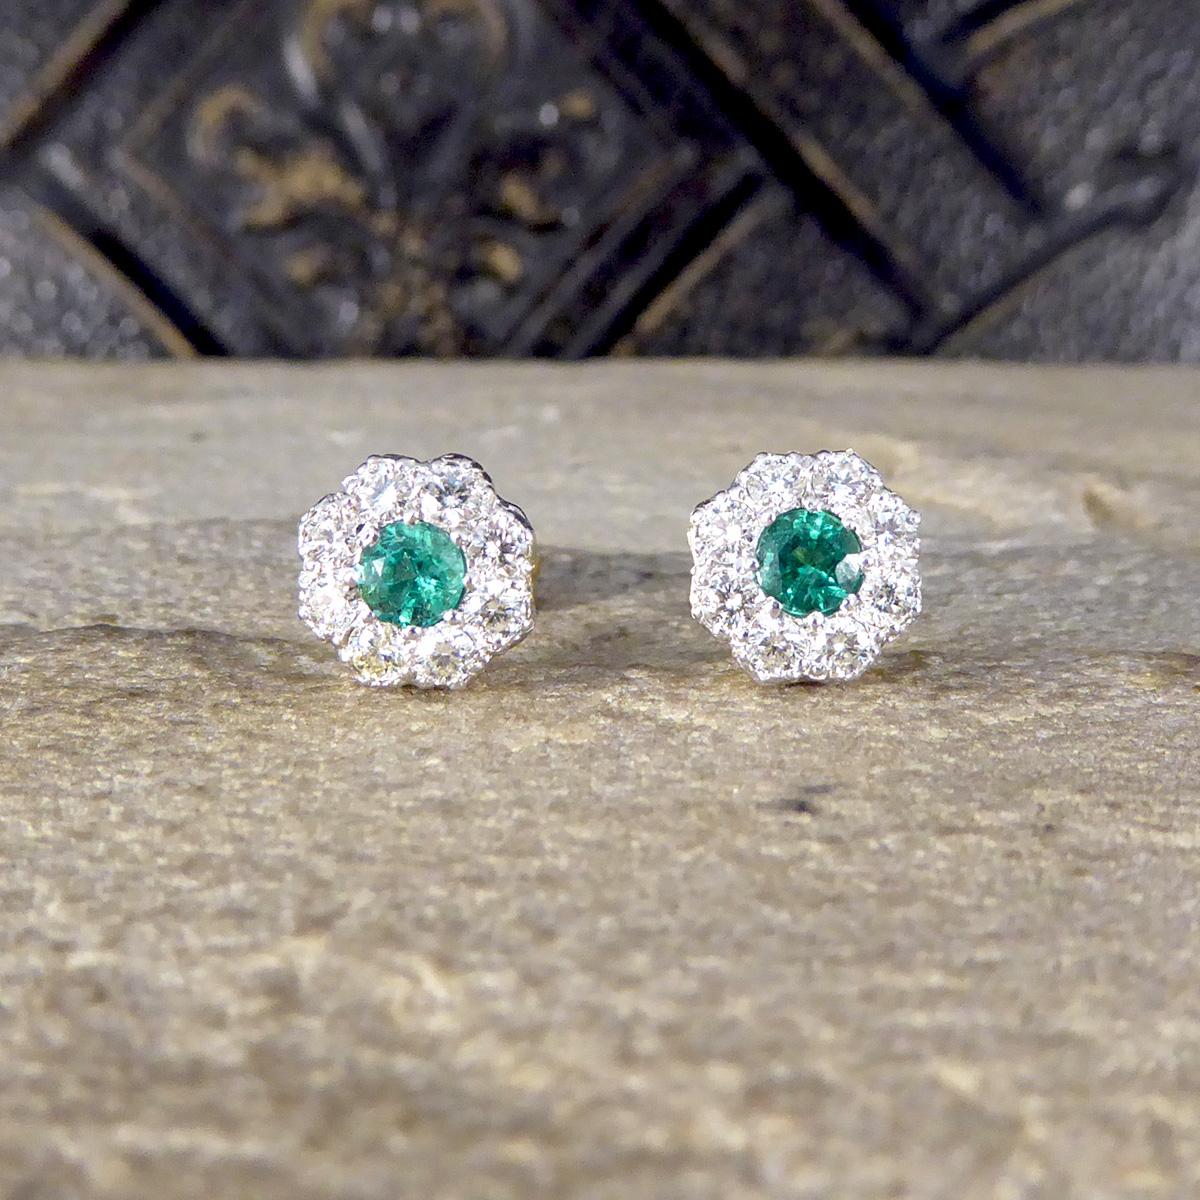 A perfectly round pair of Daisy cluster earrings with a bright and vibrant green centre. These earrings feature a 0.25ct Emerald in the core of each stud with a surround of 8 Round Brilliant Cut Diamond weight a total of 0.35ct in each ear. The